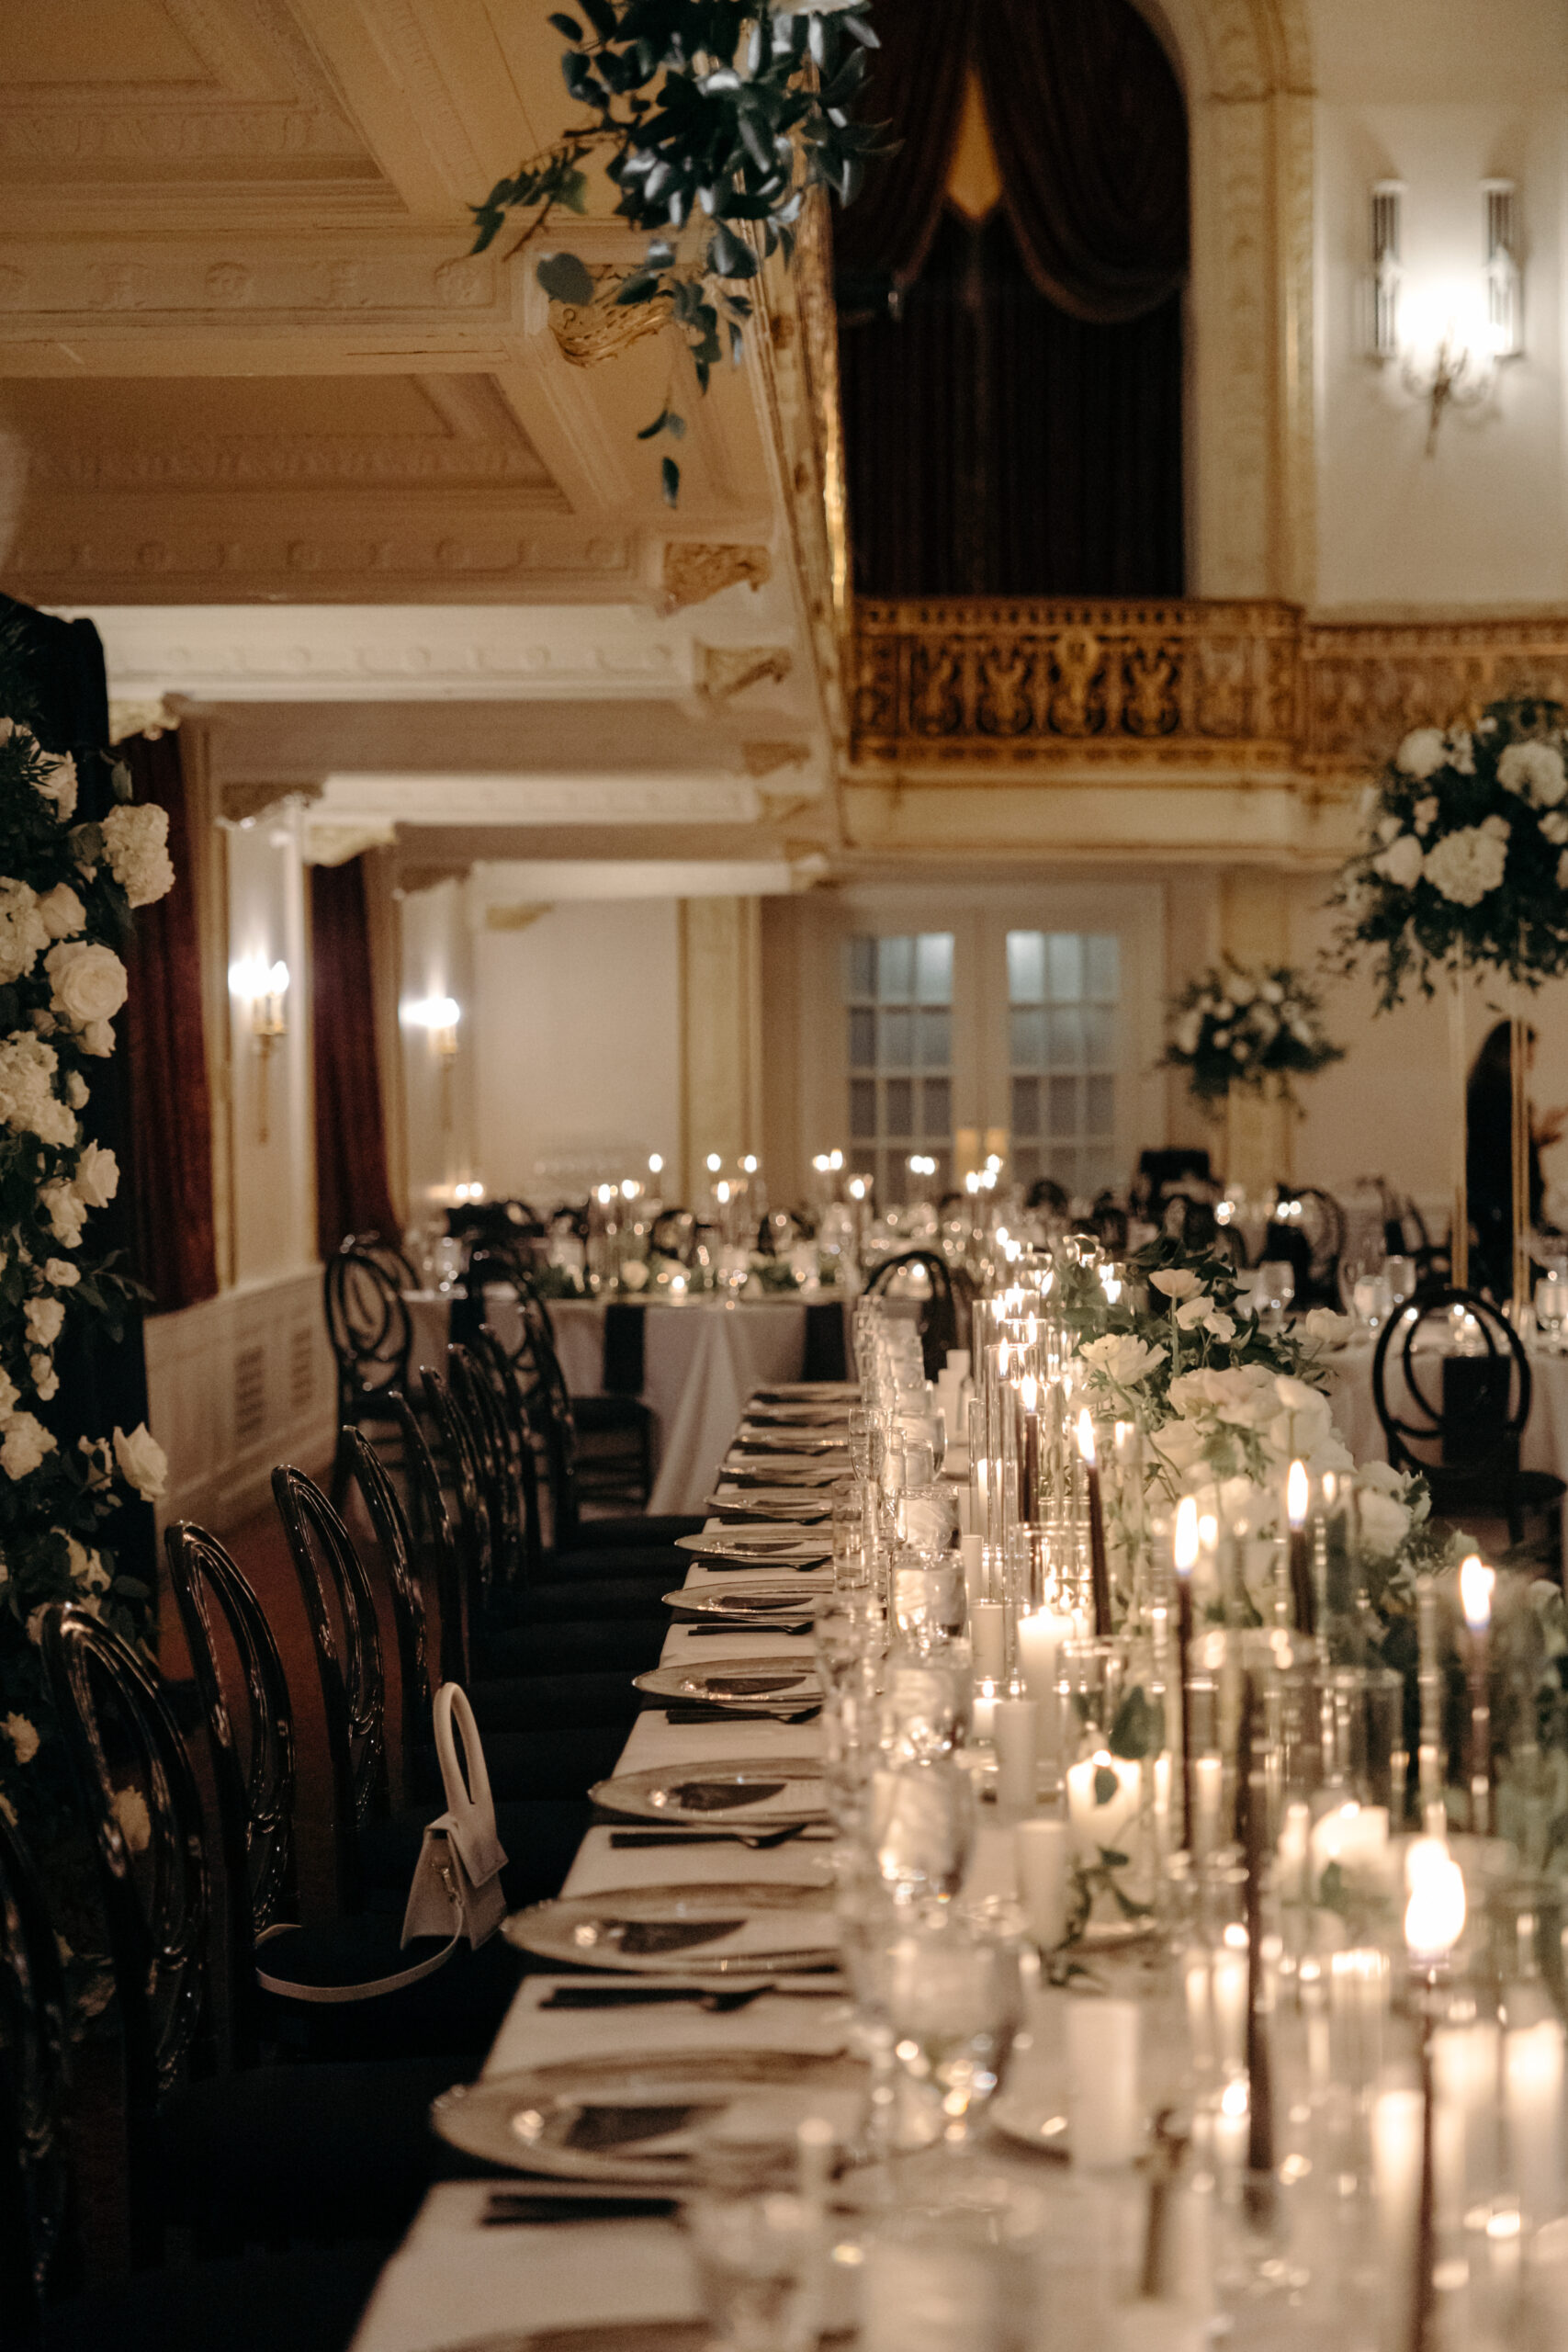 A photo of tables and chairs set for dinner at a wedding, with lit candles and centerpieces.